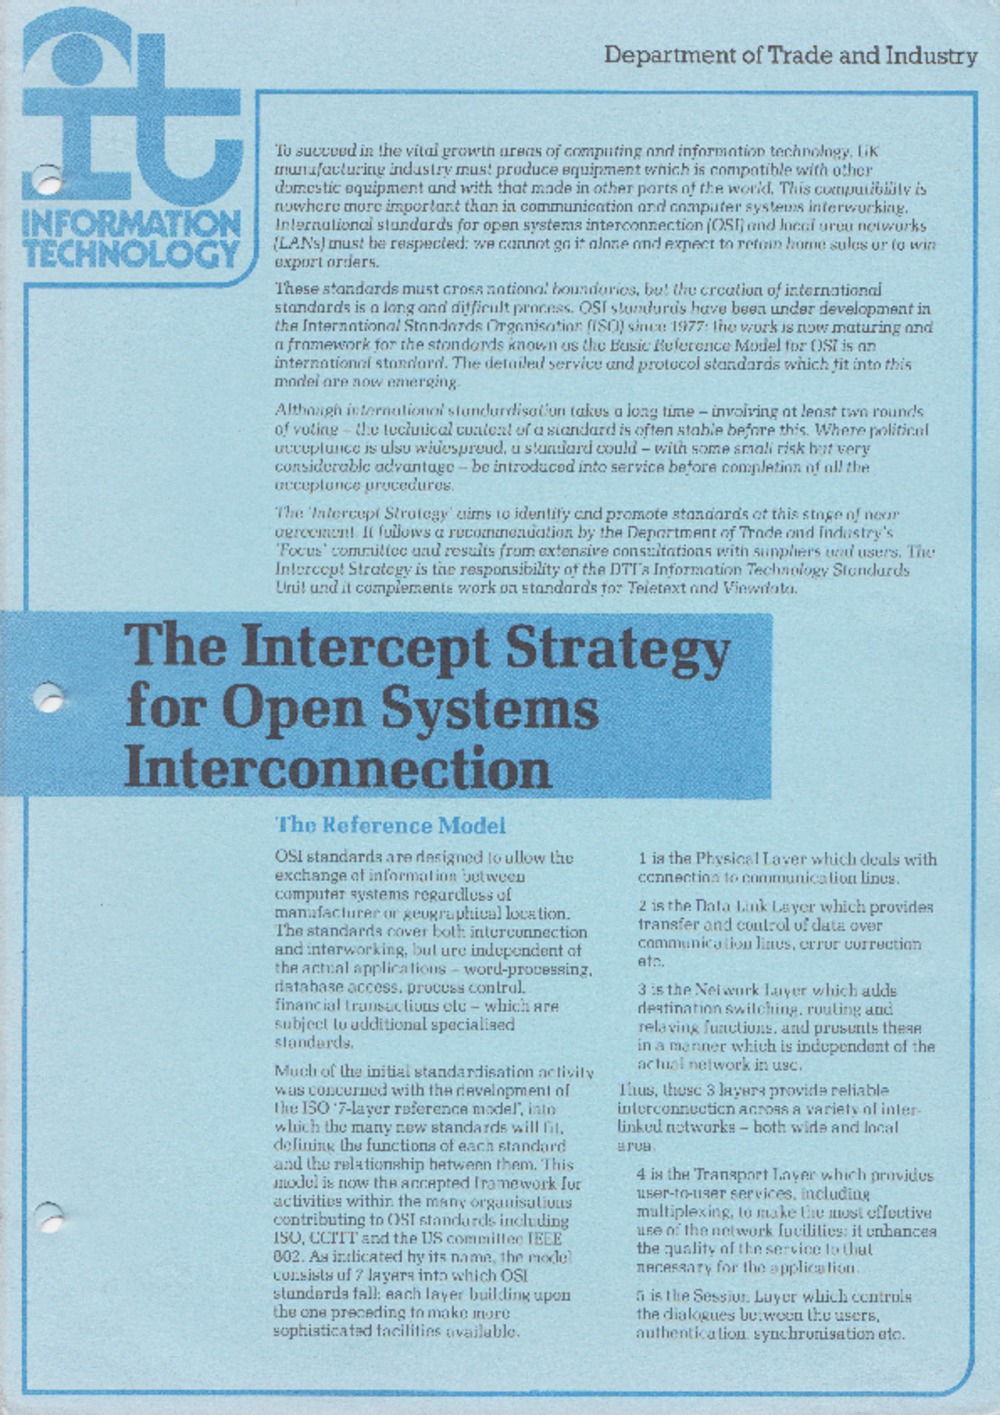 Article: Information Technology - The Intercept Strategy for Open Systems Interconnection